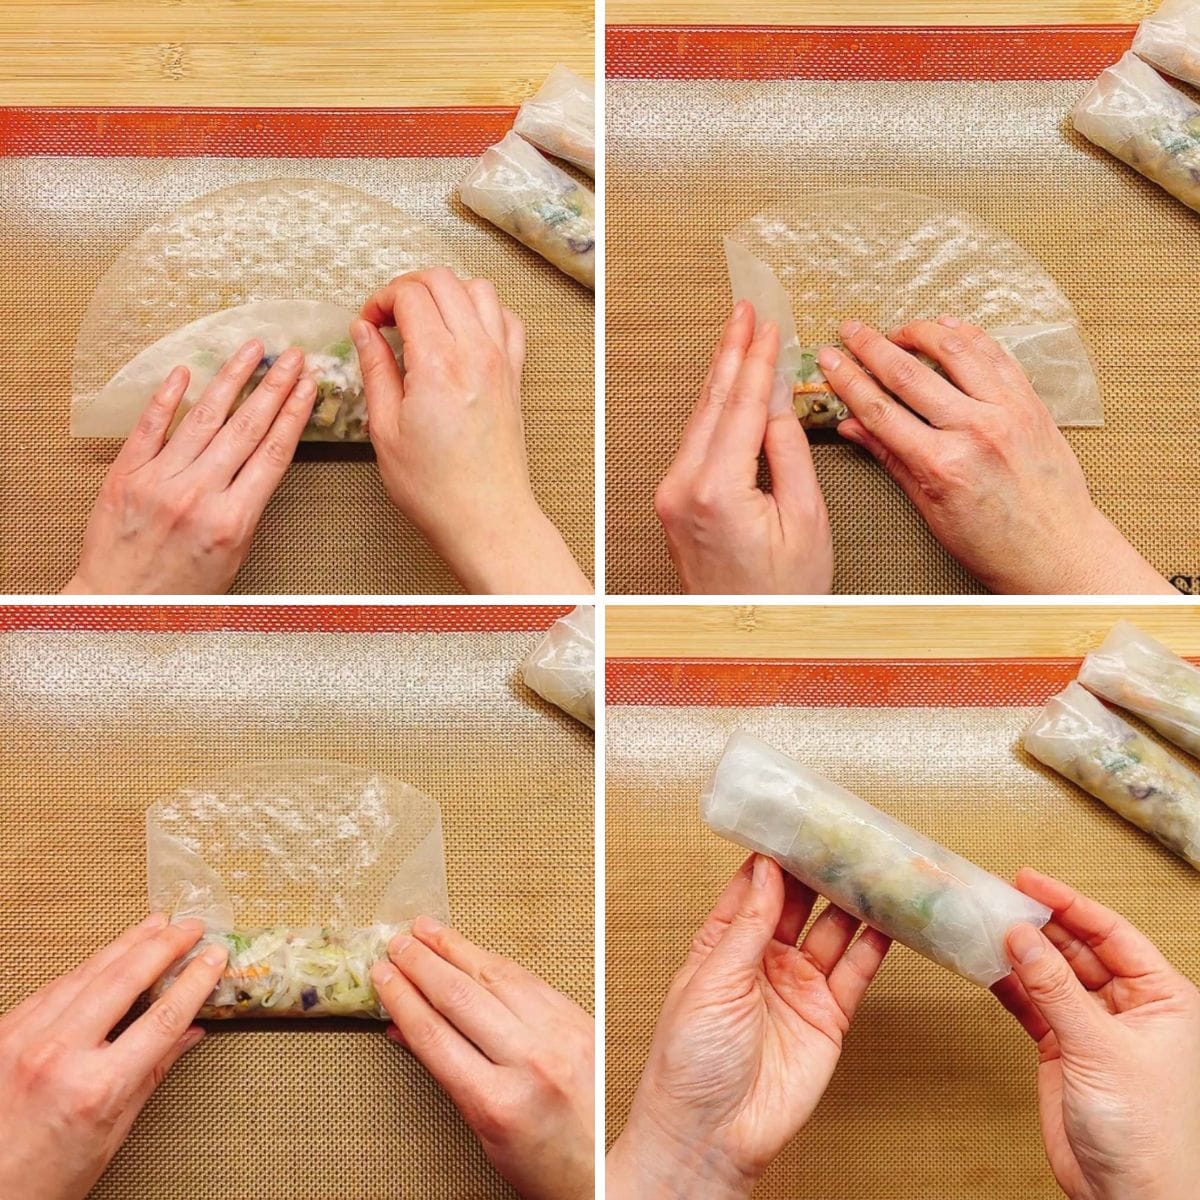 Person demos how to roll rice paper sheets to make rolls.